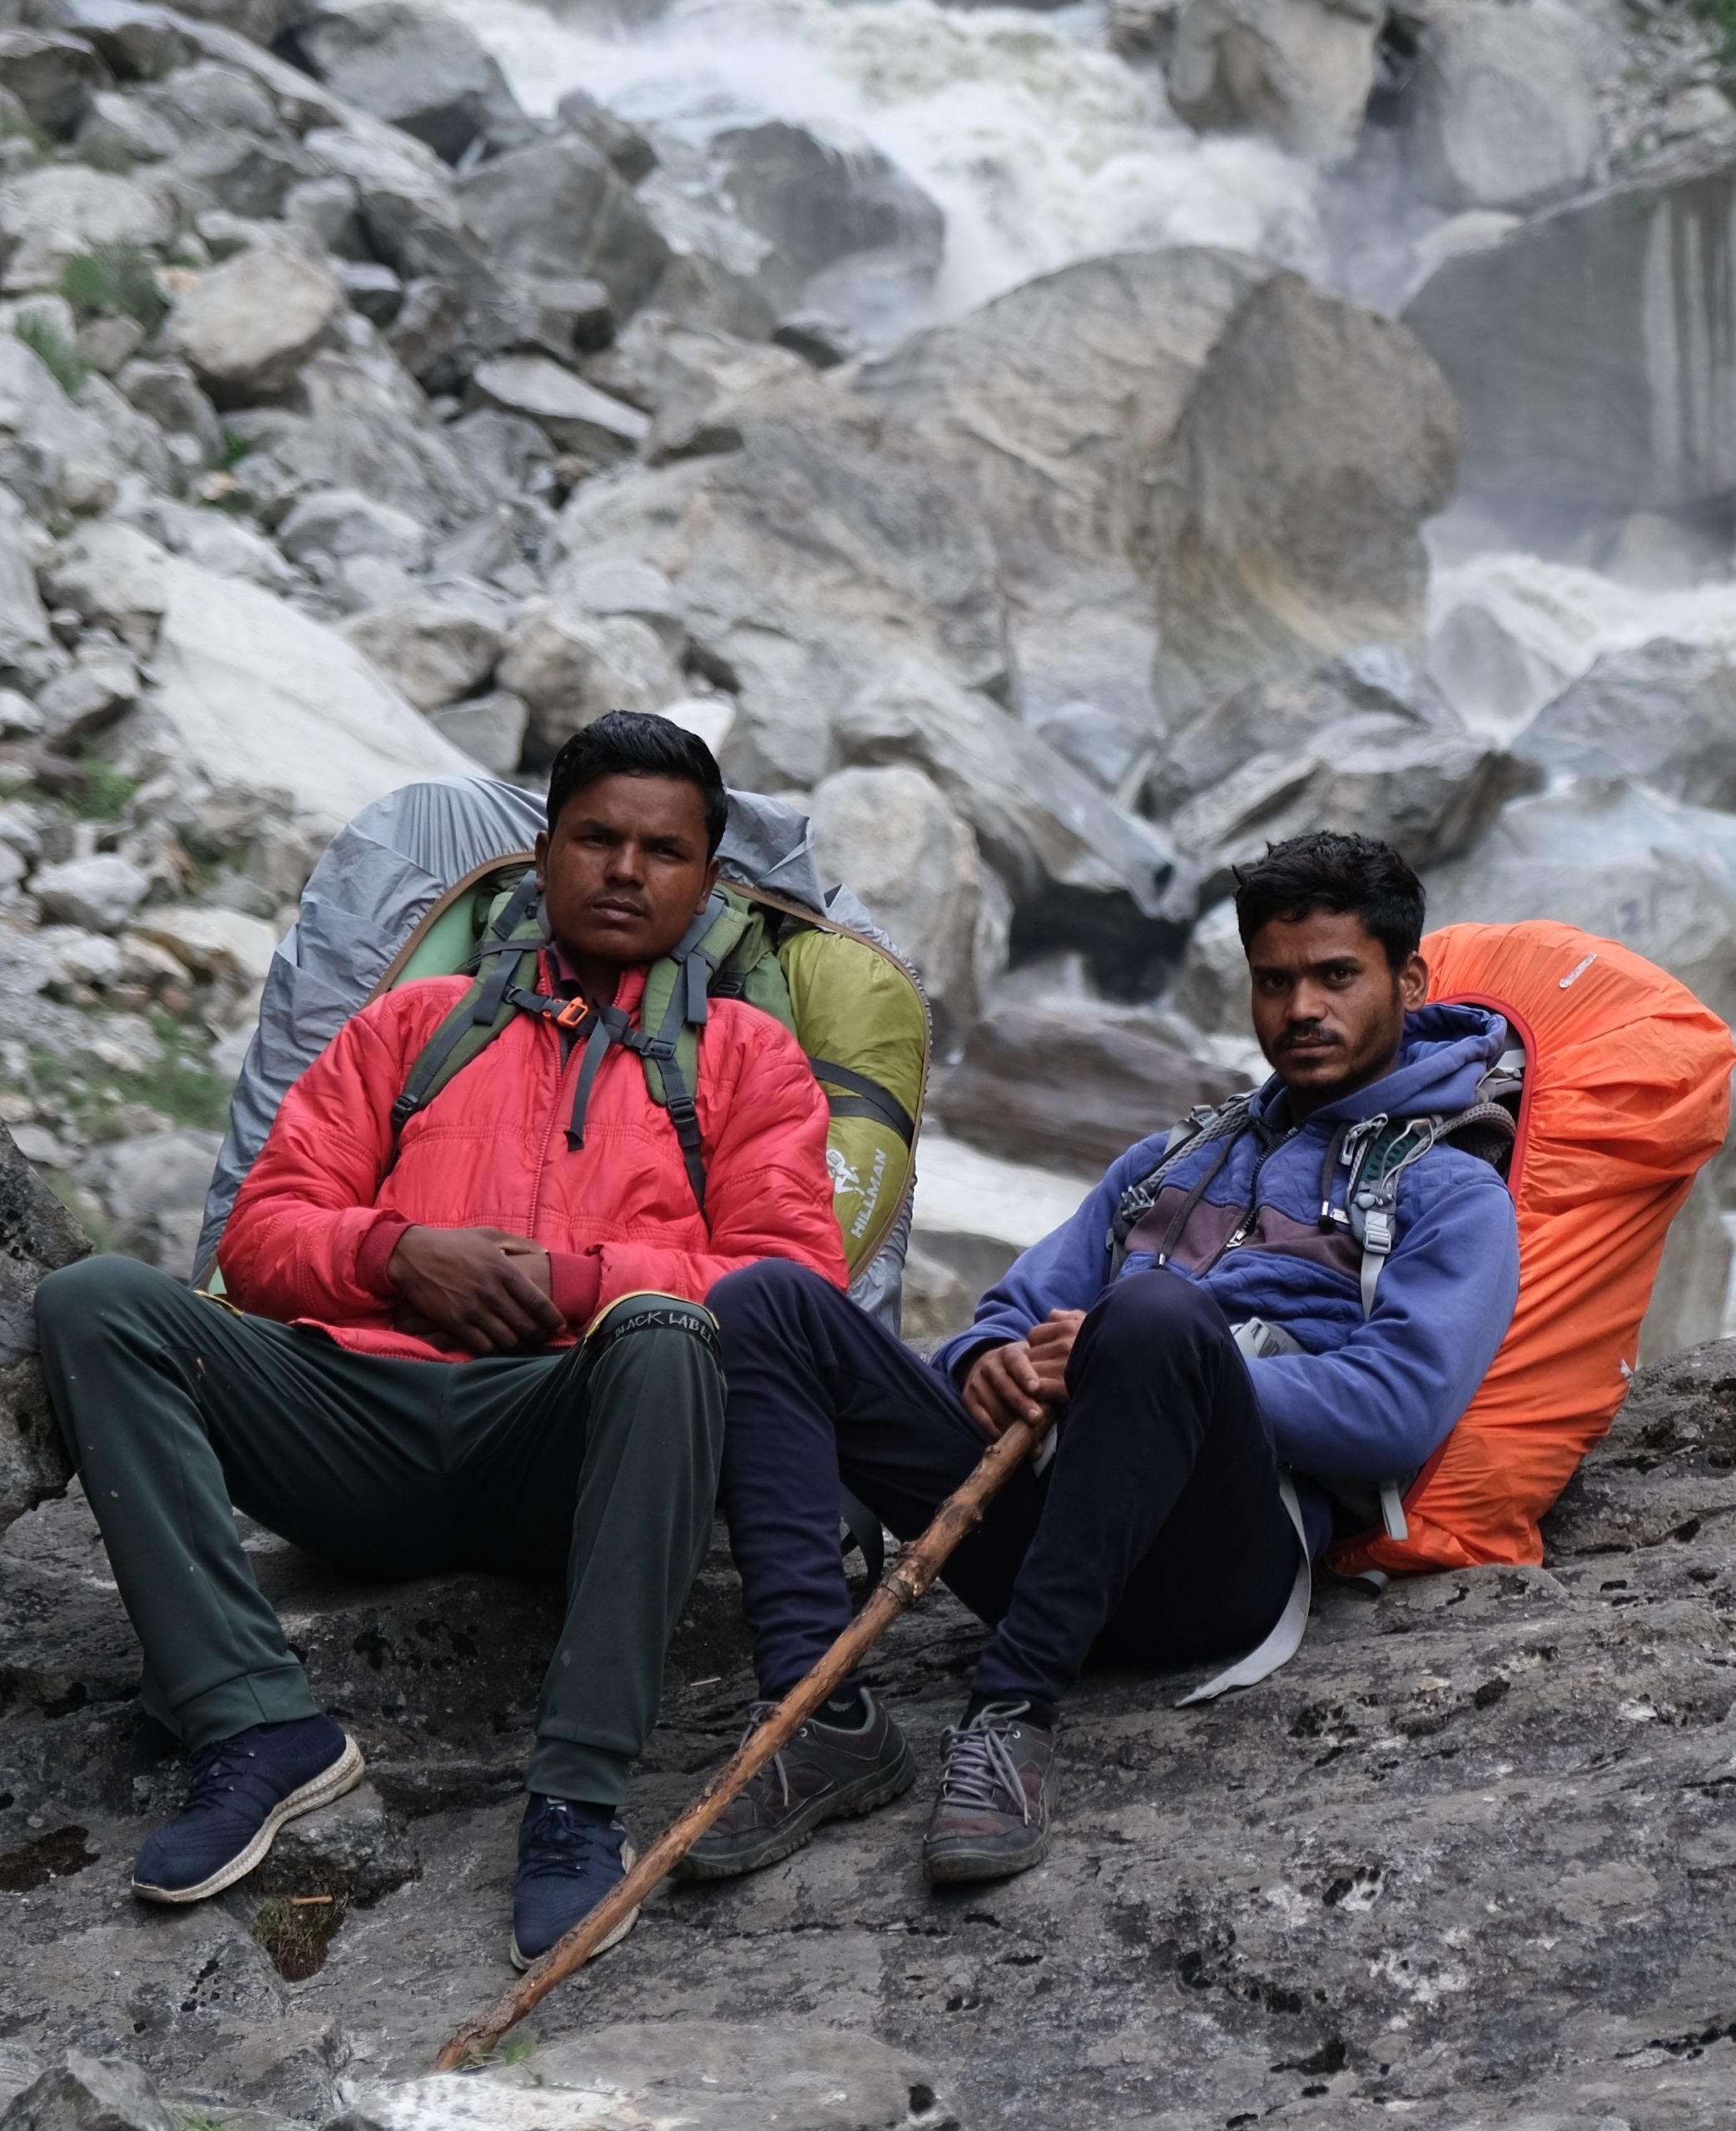 the state government’s Public Works Department maintaining roads in upper Johar, and also as porters and guides in their spare time. Photographed near Mapang village in the Johar Valley in May 2022. 